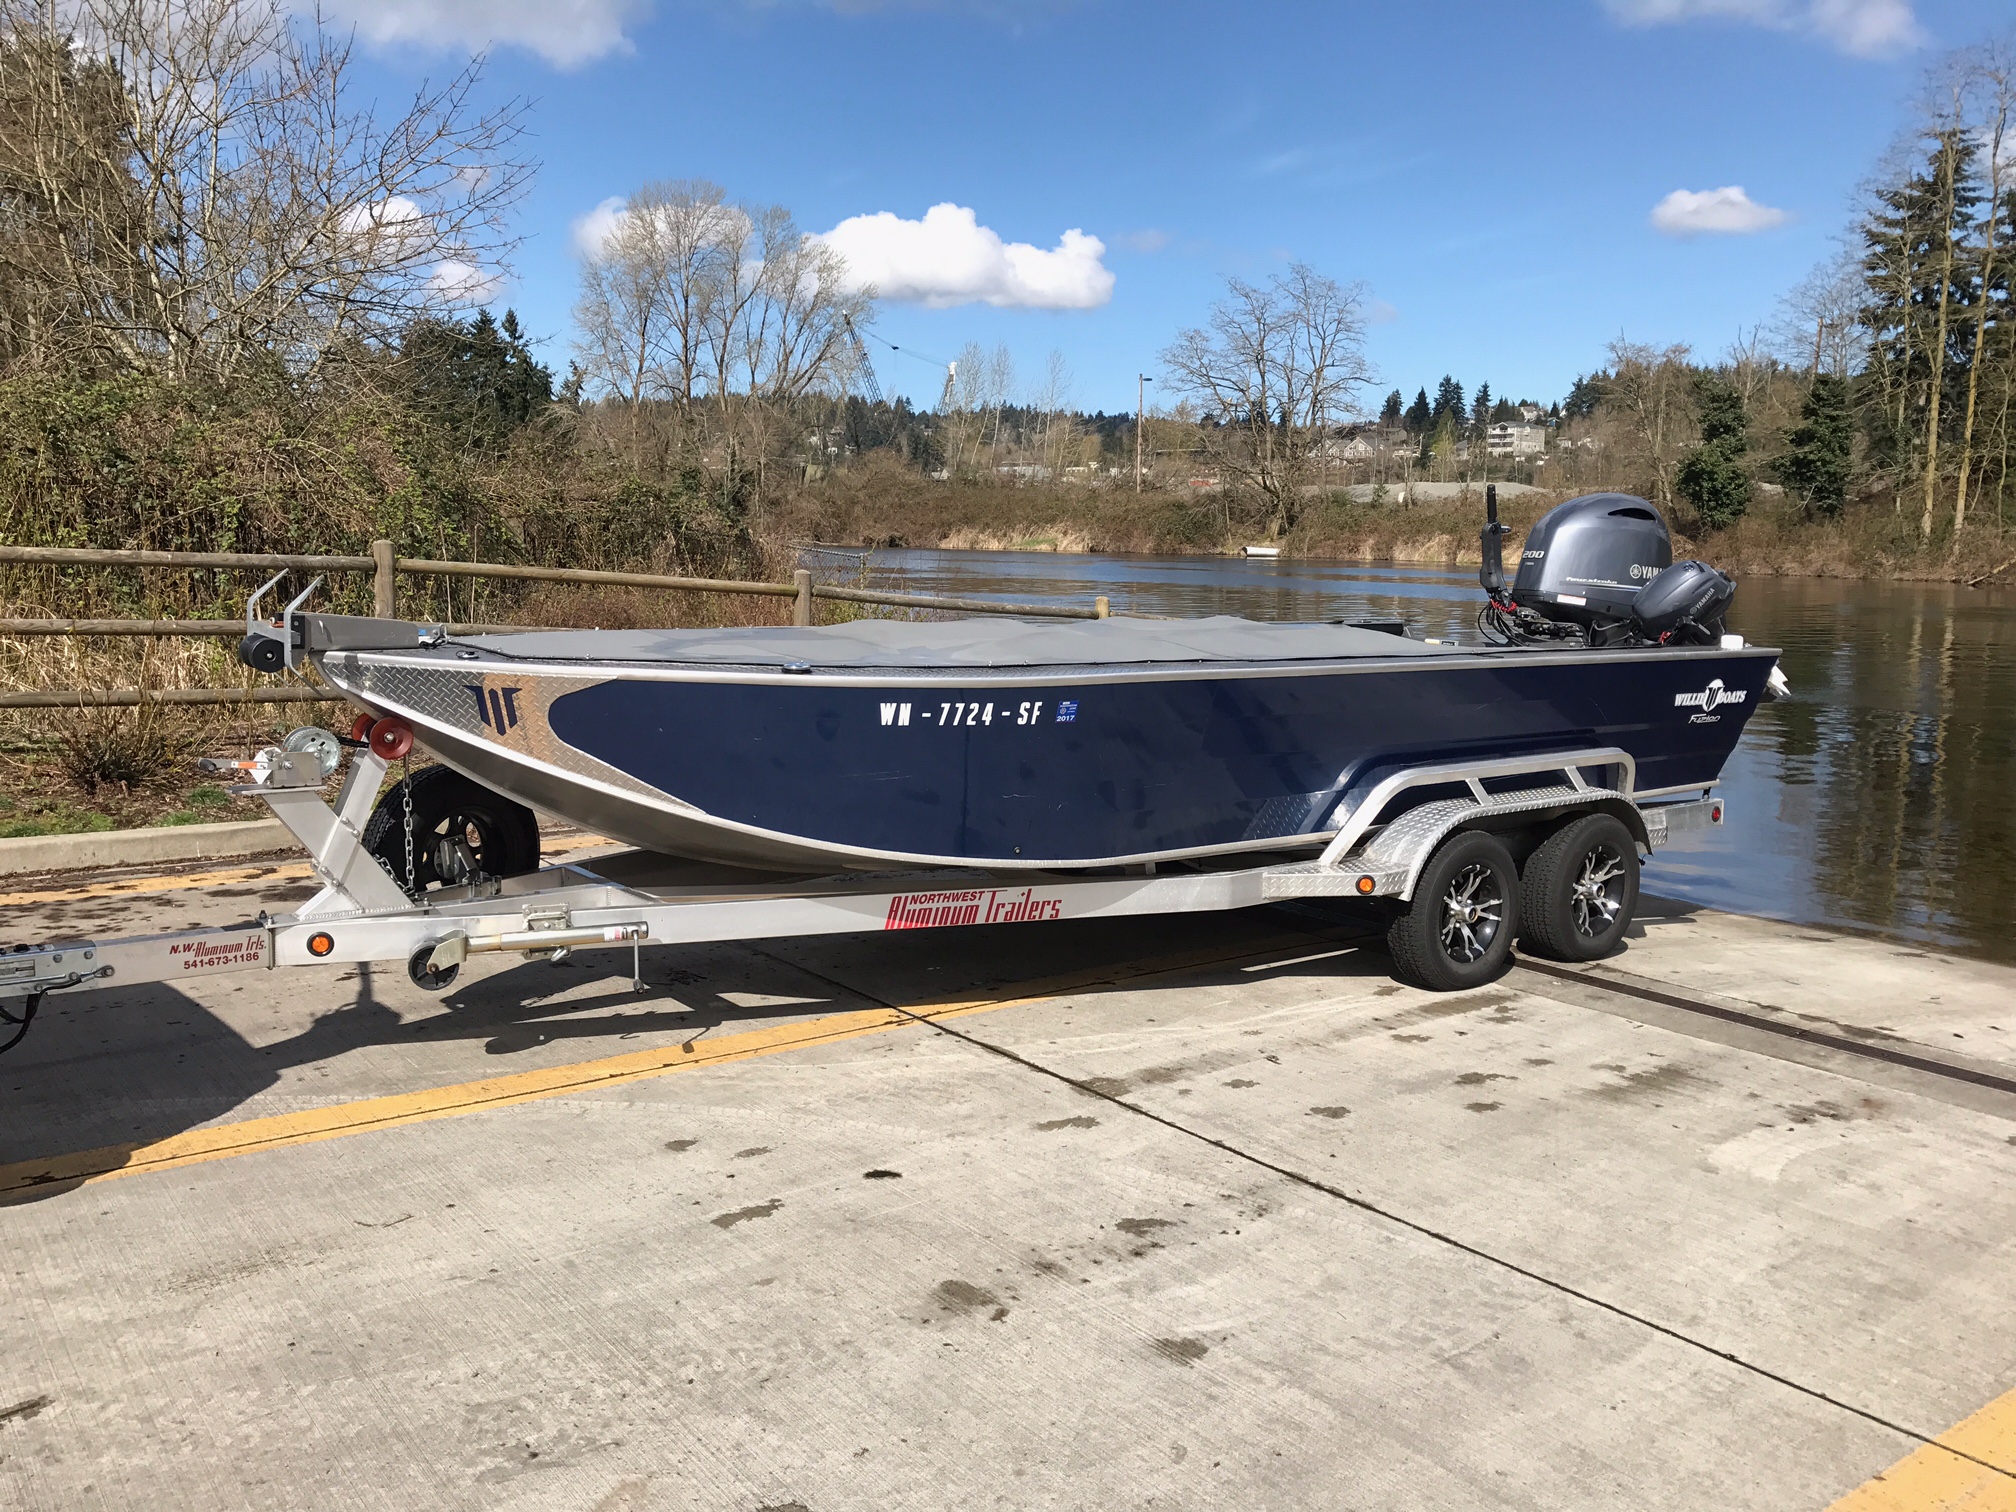 Pre-Owned Boats for Sale - Willie Boats